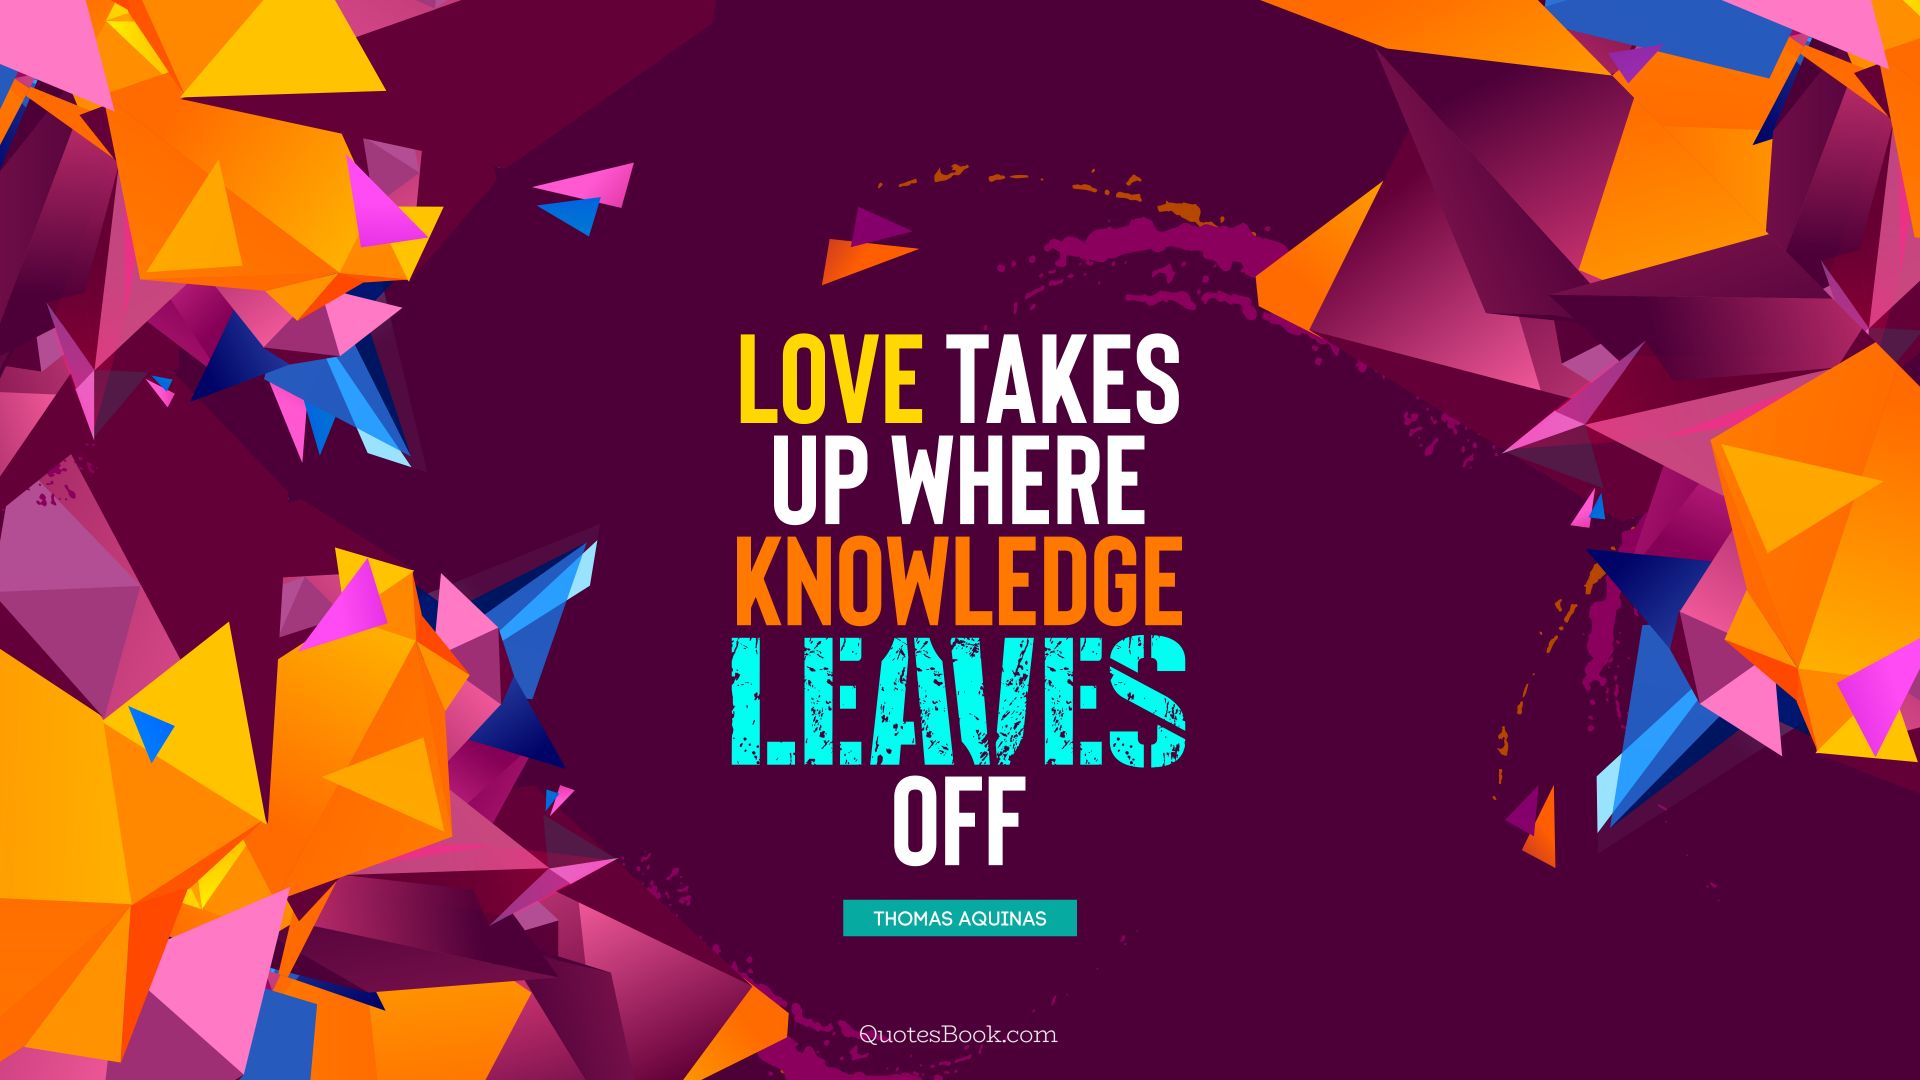 Love takes up where knowledge leaves off. - Quote by Thomas Aquinas